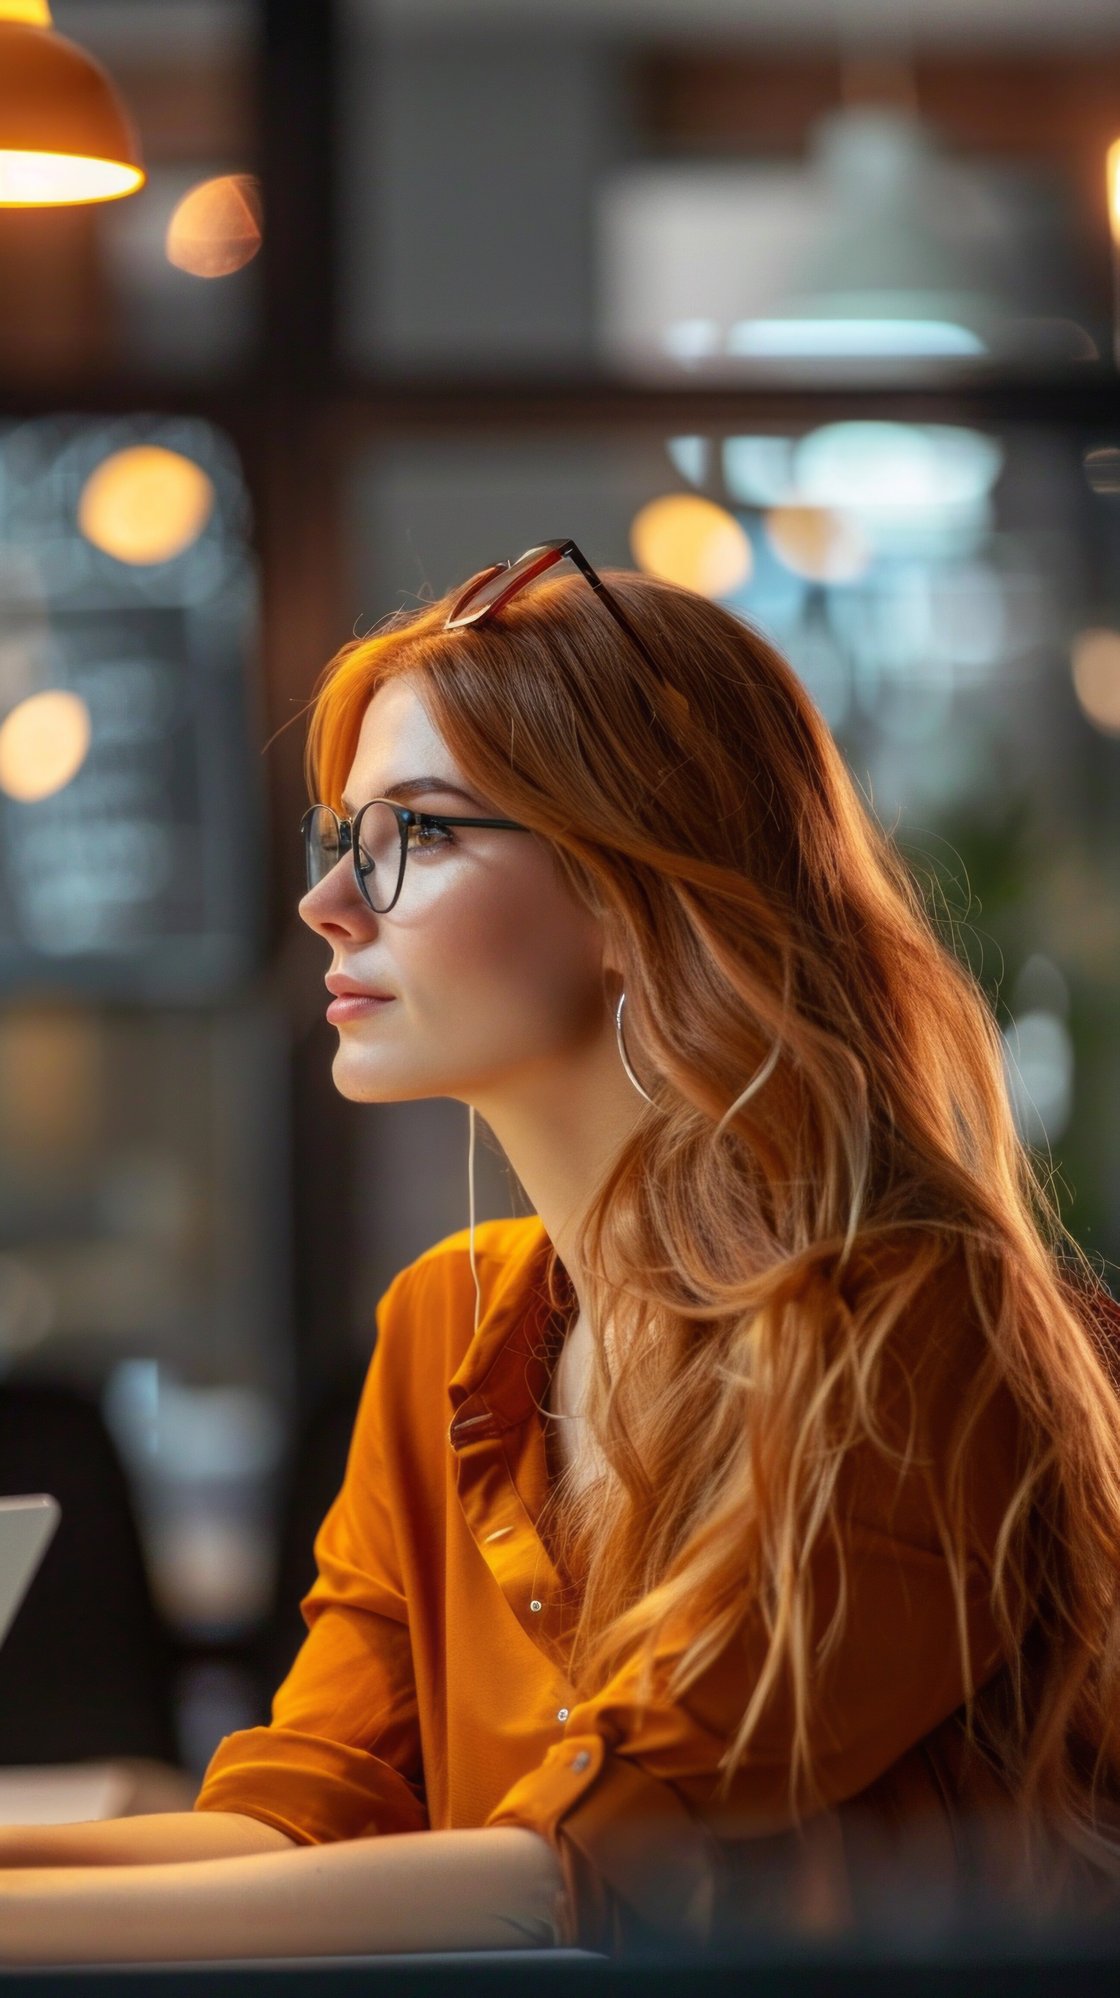 woman-with-long-red-hair-glasses-sits-coffee-shop-lost-thought-warm-light-casts-golden-glow-her-face-creating-sense-intimacy-tranquility